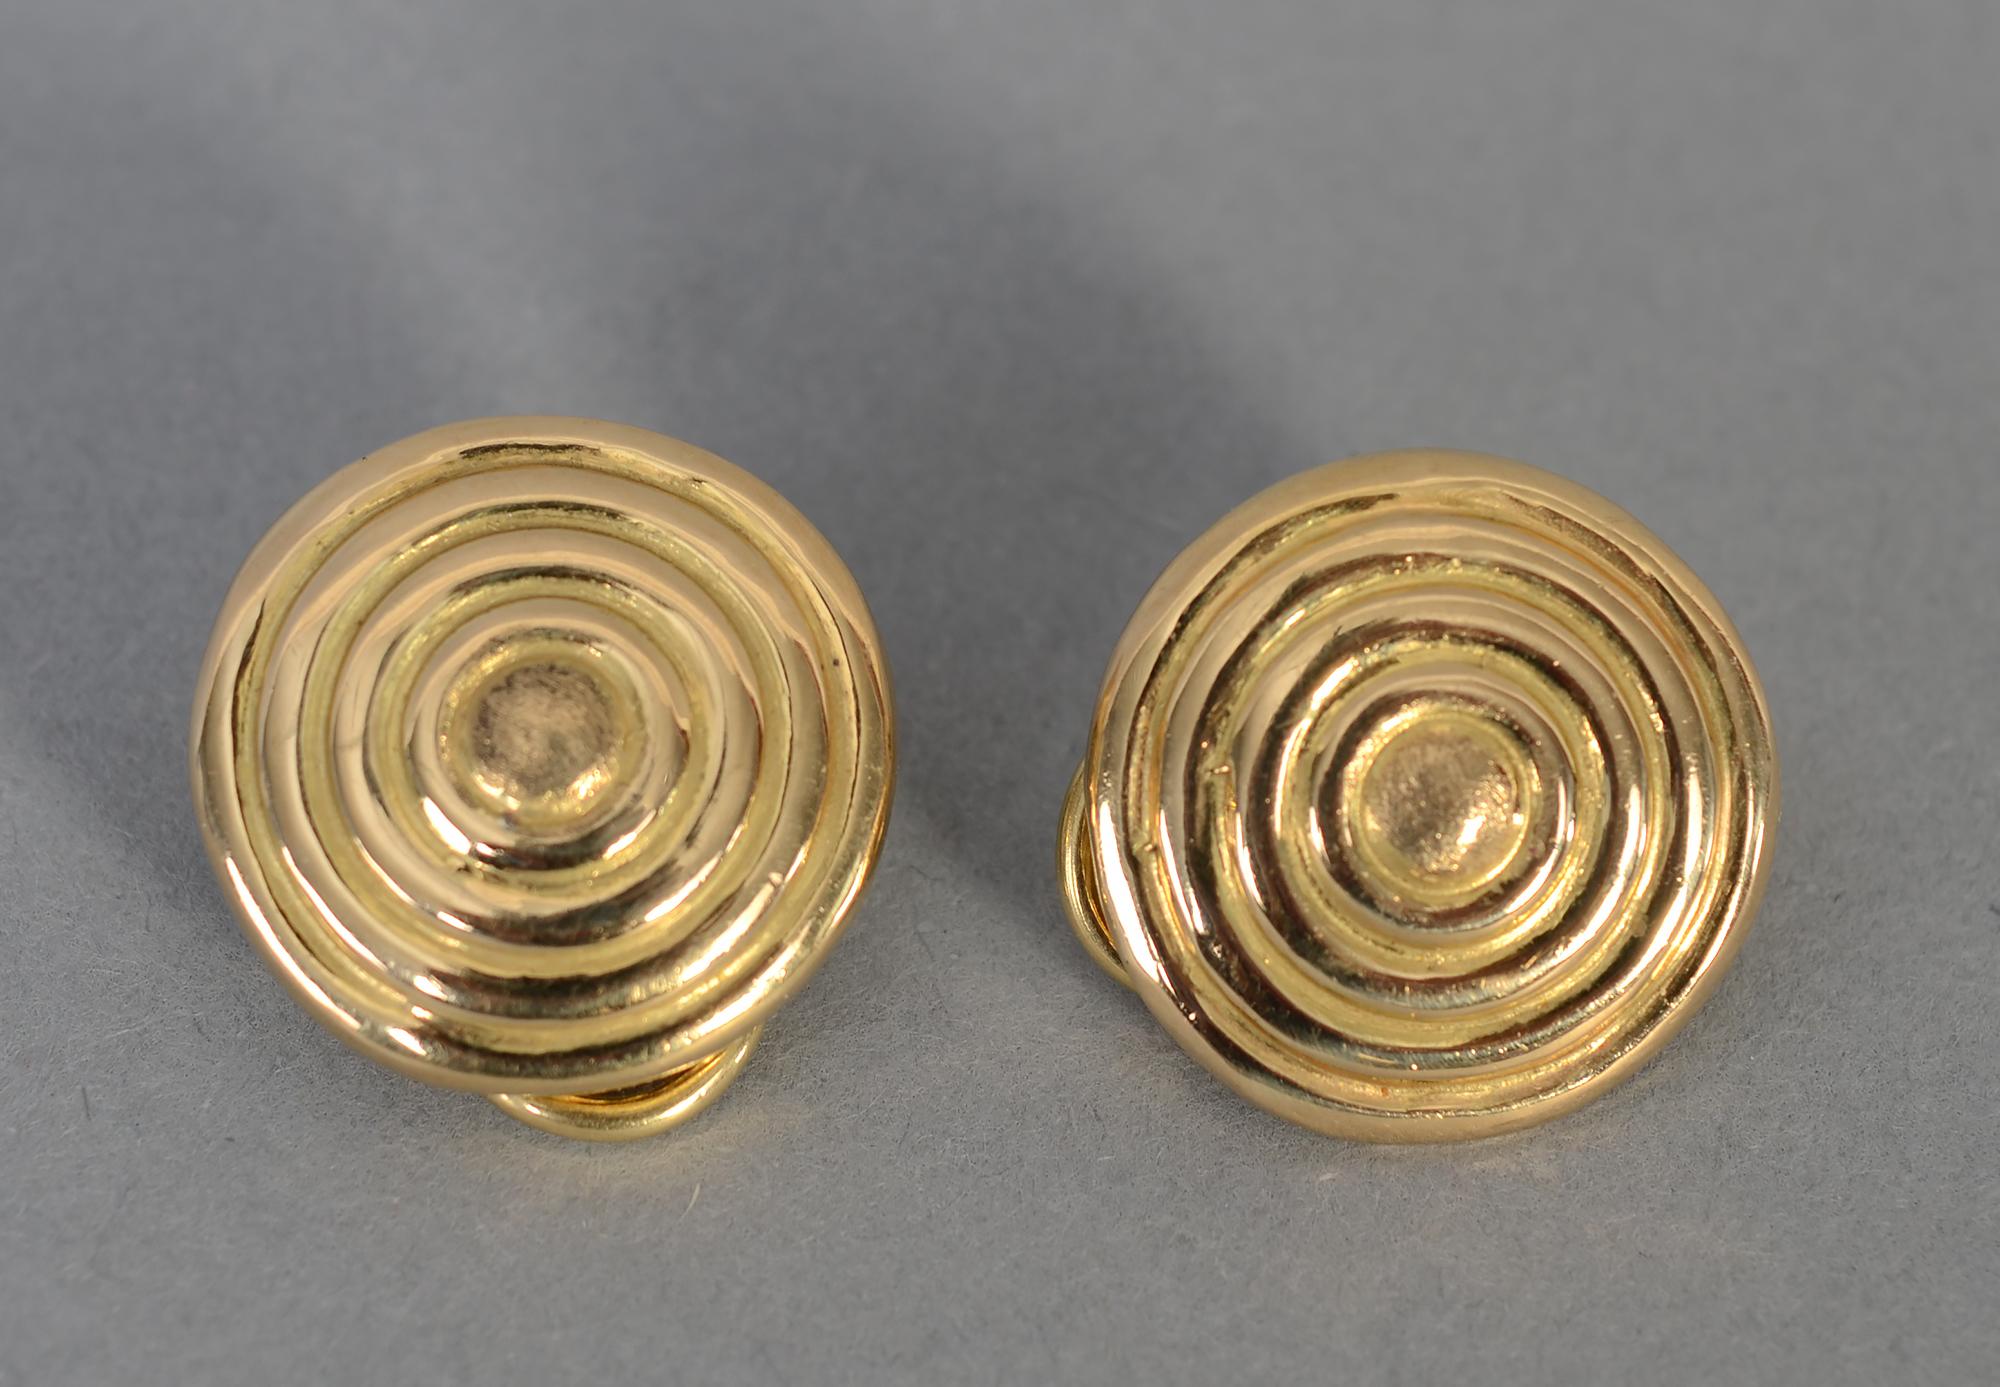 Ideal everyday earrings of 18 karat gold with concentric raised circles. The earrings are 3/4 inch in diameter. Clip backs can be converted to posts.